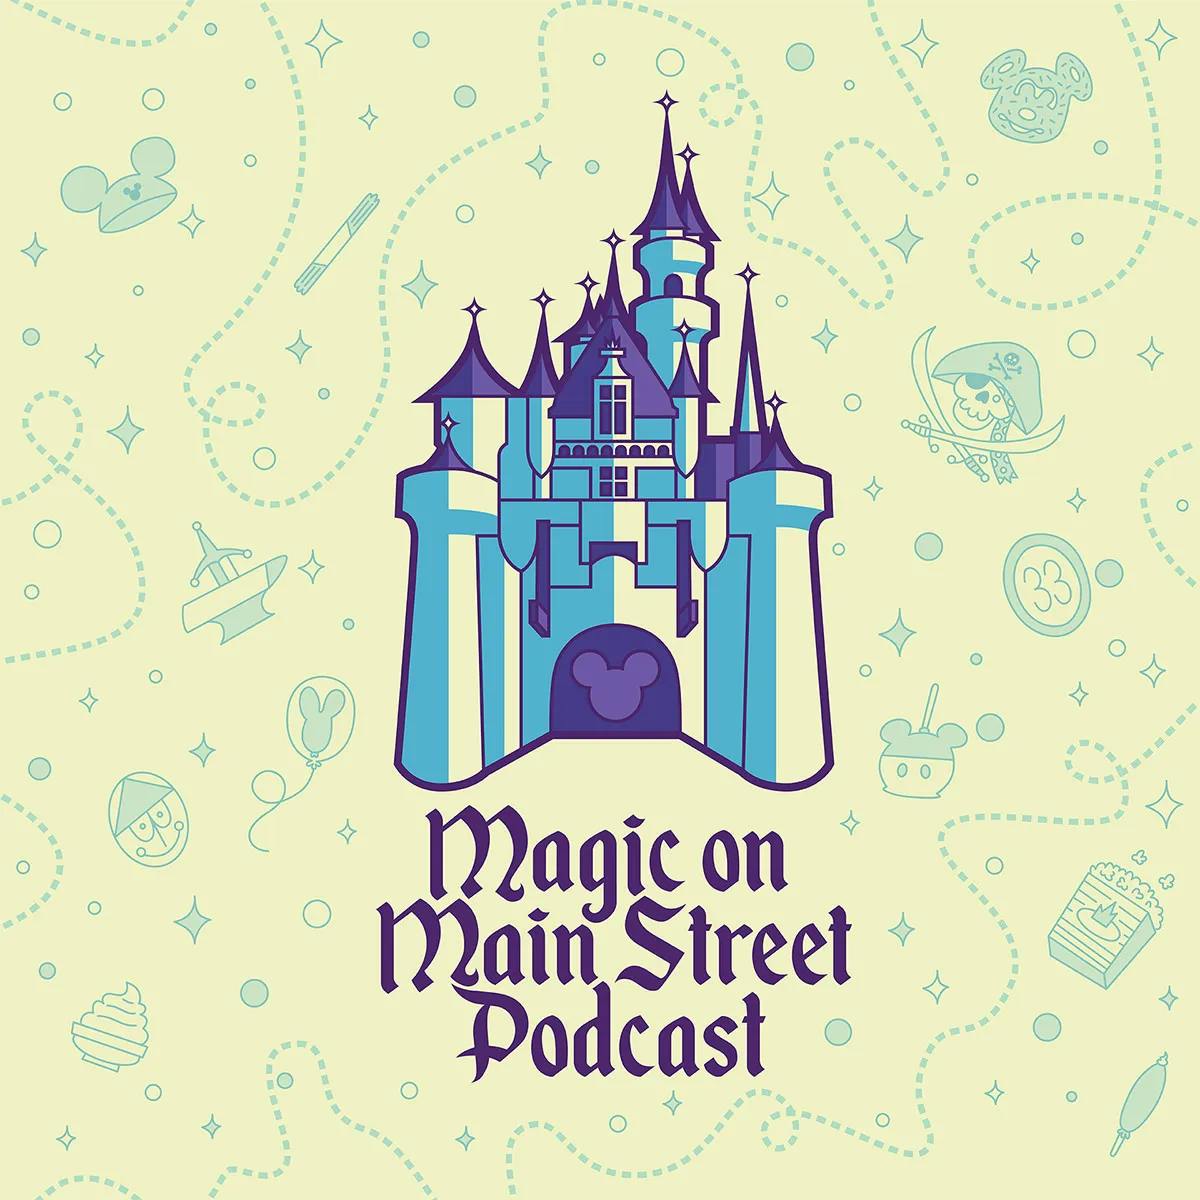 Magic on Main Street Podcast logo on bstyled background